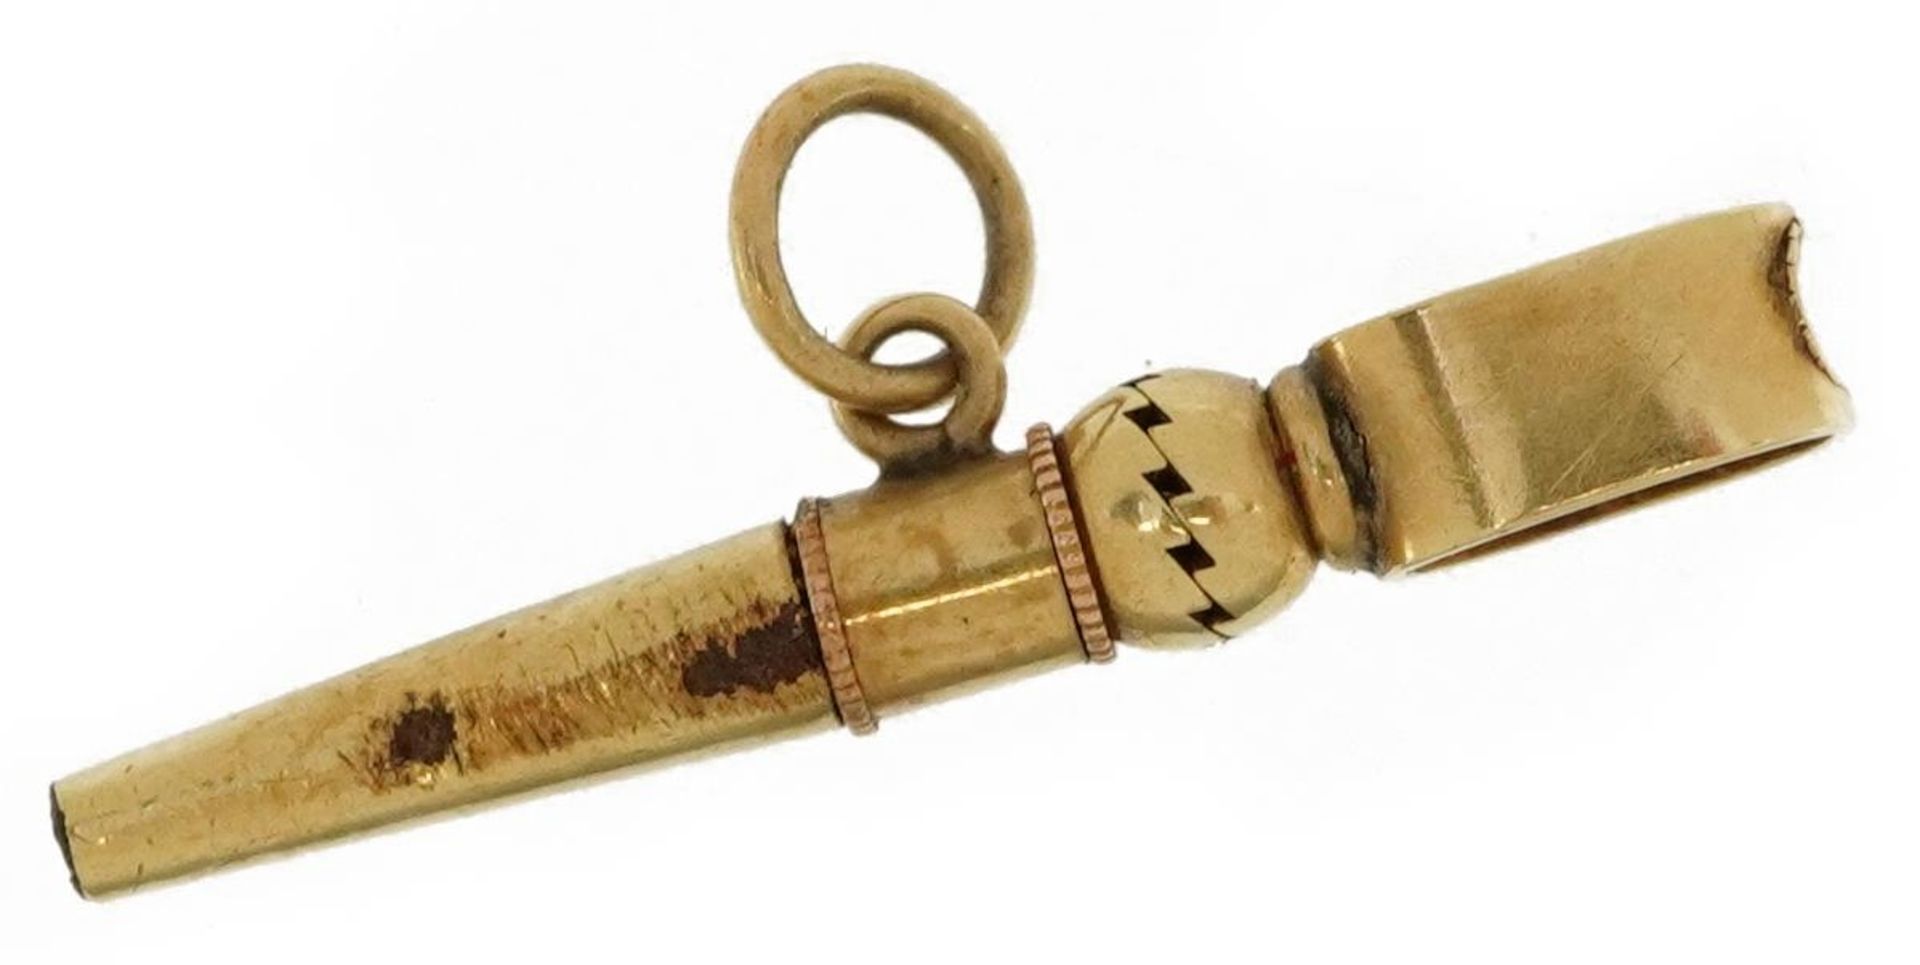 Yellow metal watch key charm, 2.3cm high, 1.0g : For further information on this lot please